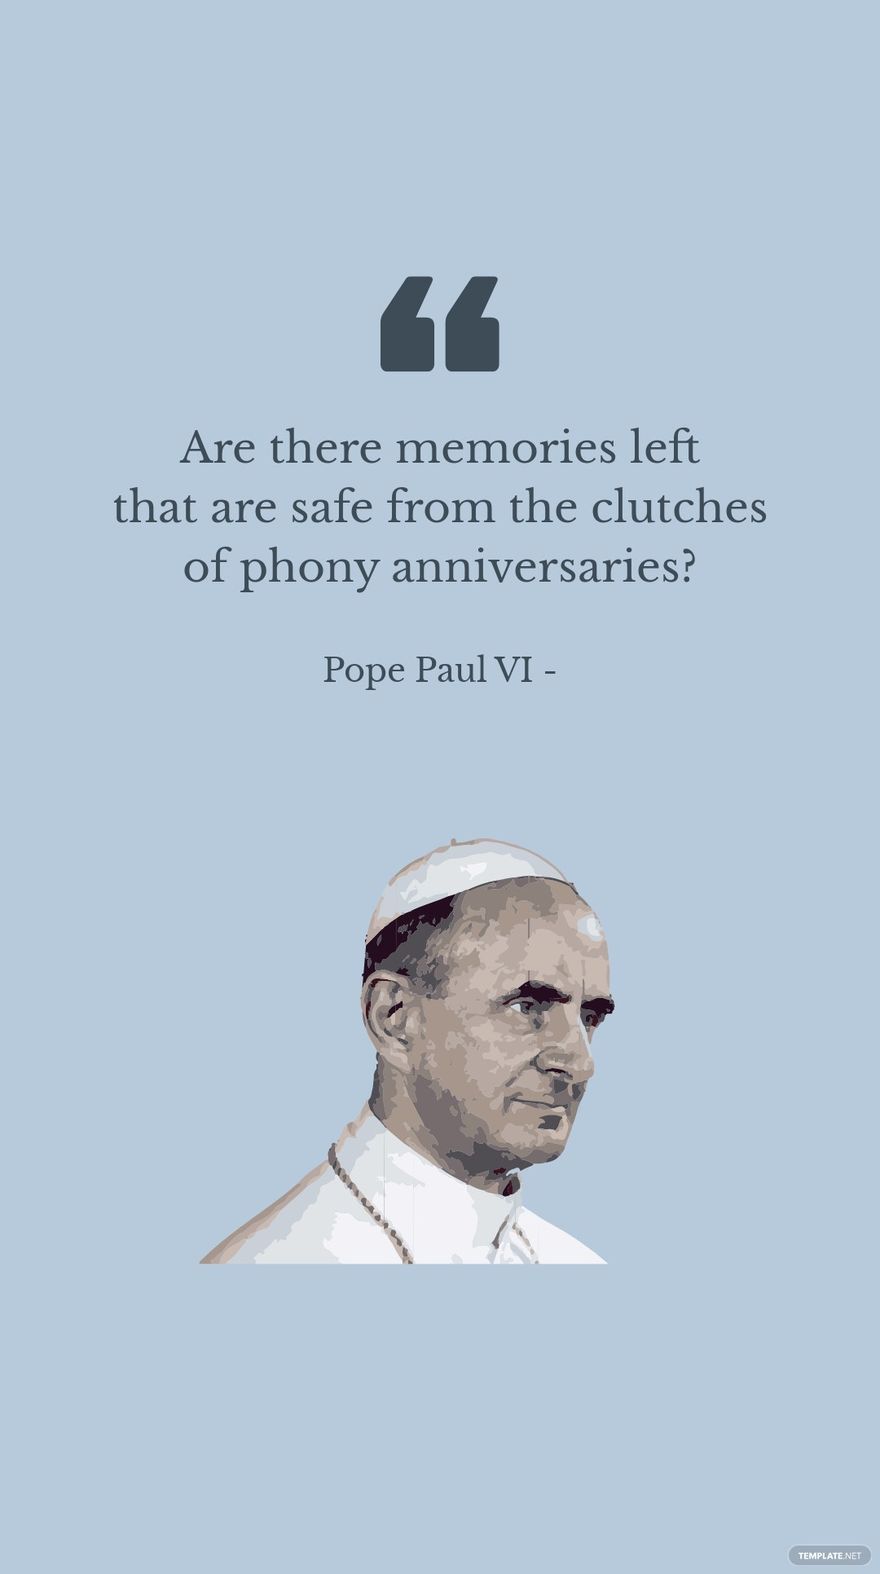 Pope Paul VI - Are there memories left that are safe from the clutches of phony anniversaries? in JPG